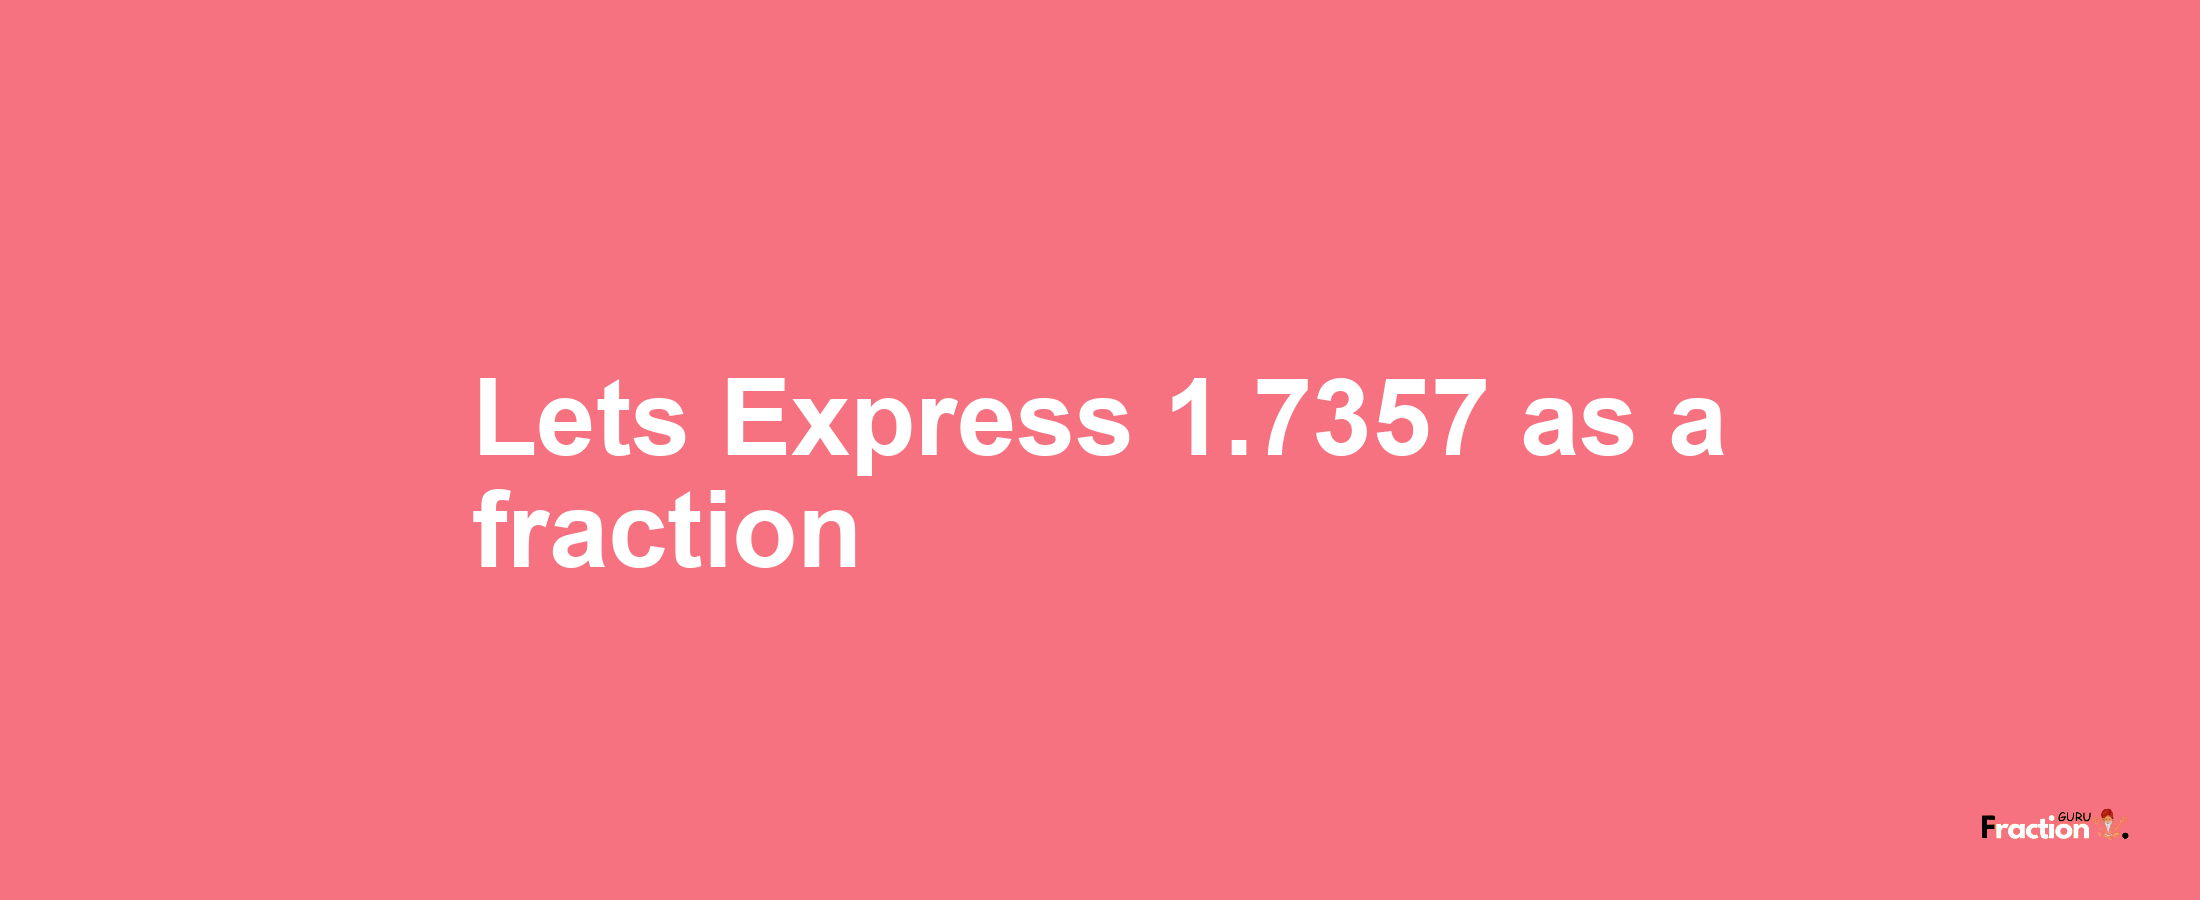 Lets Express 1.7357 as afraction